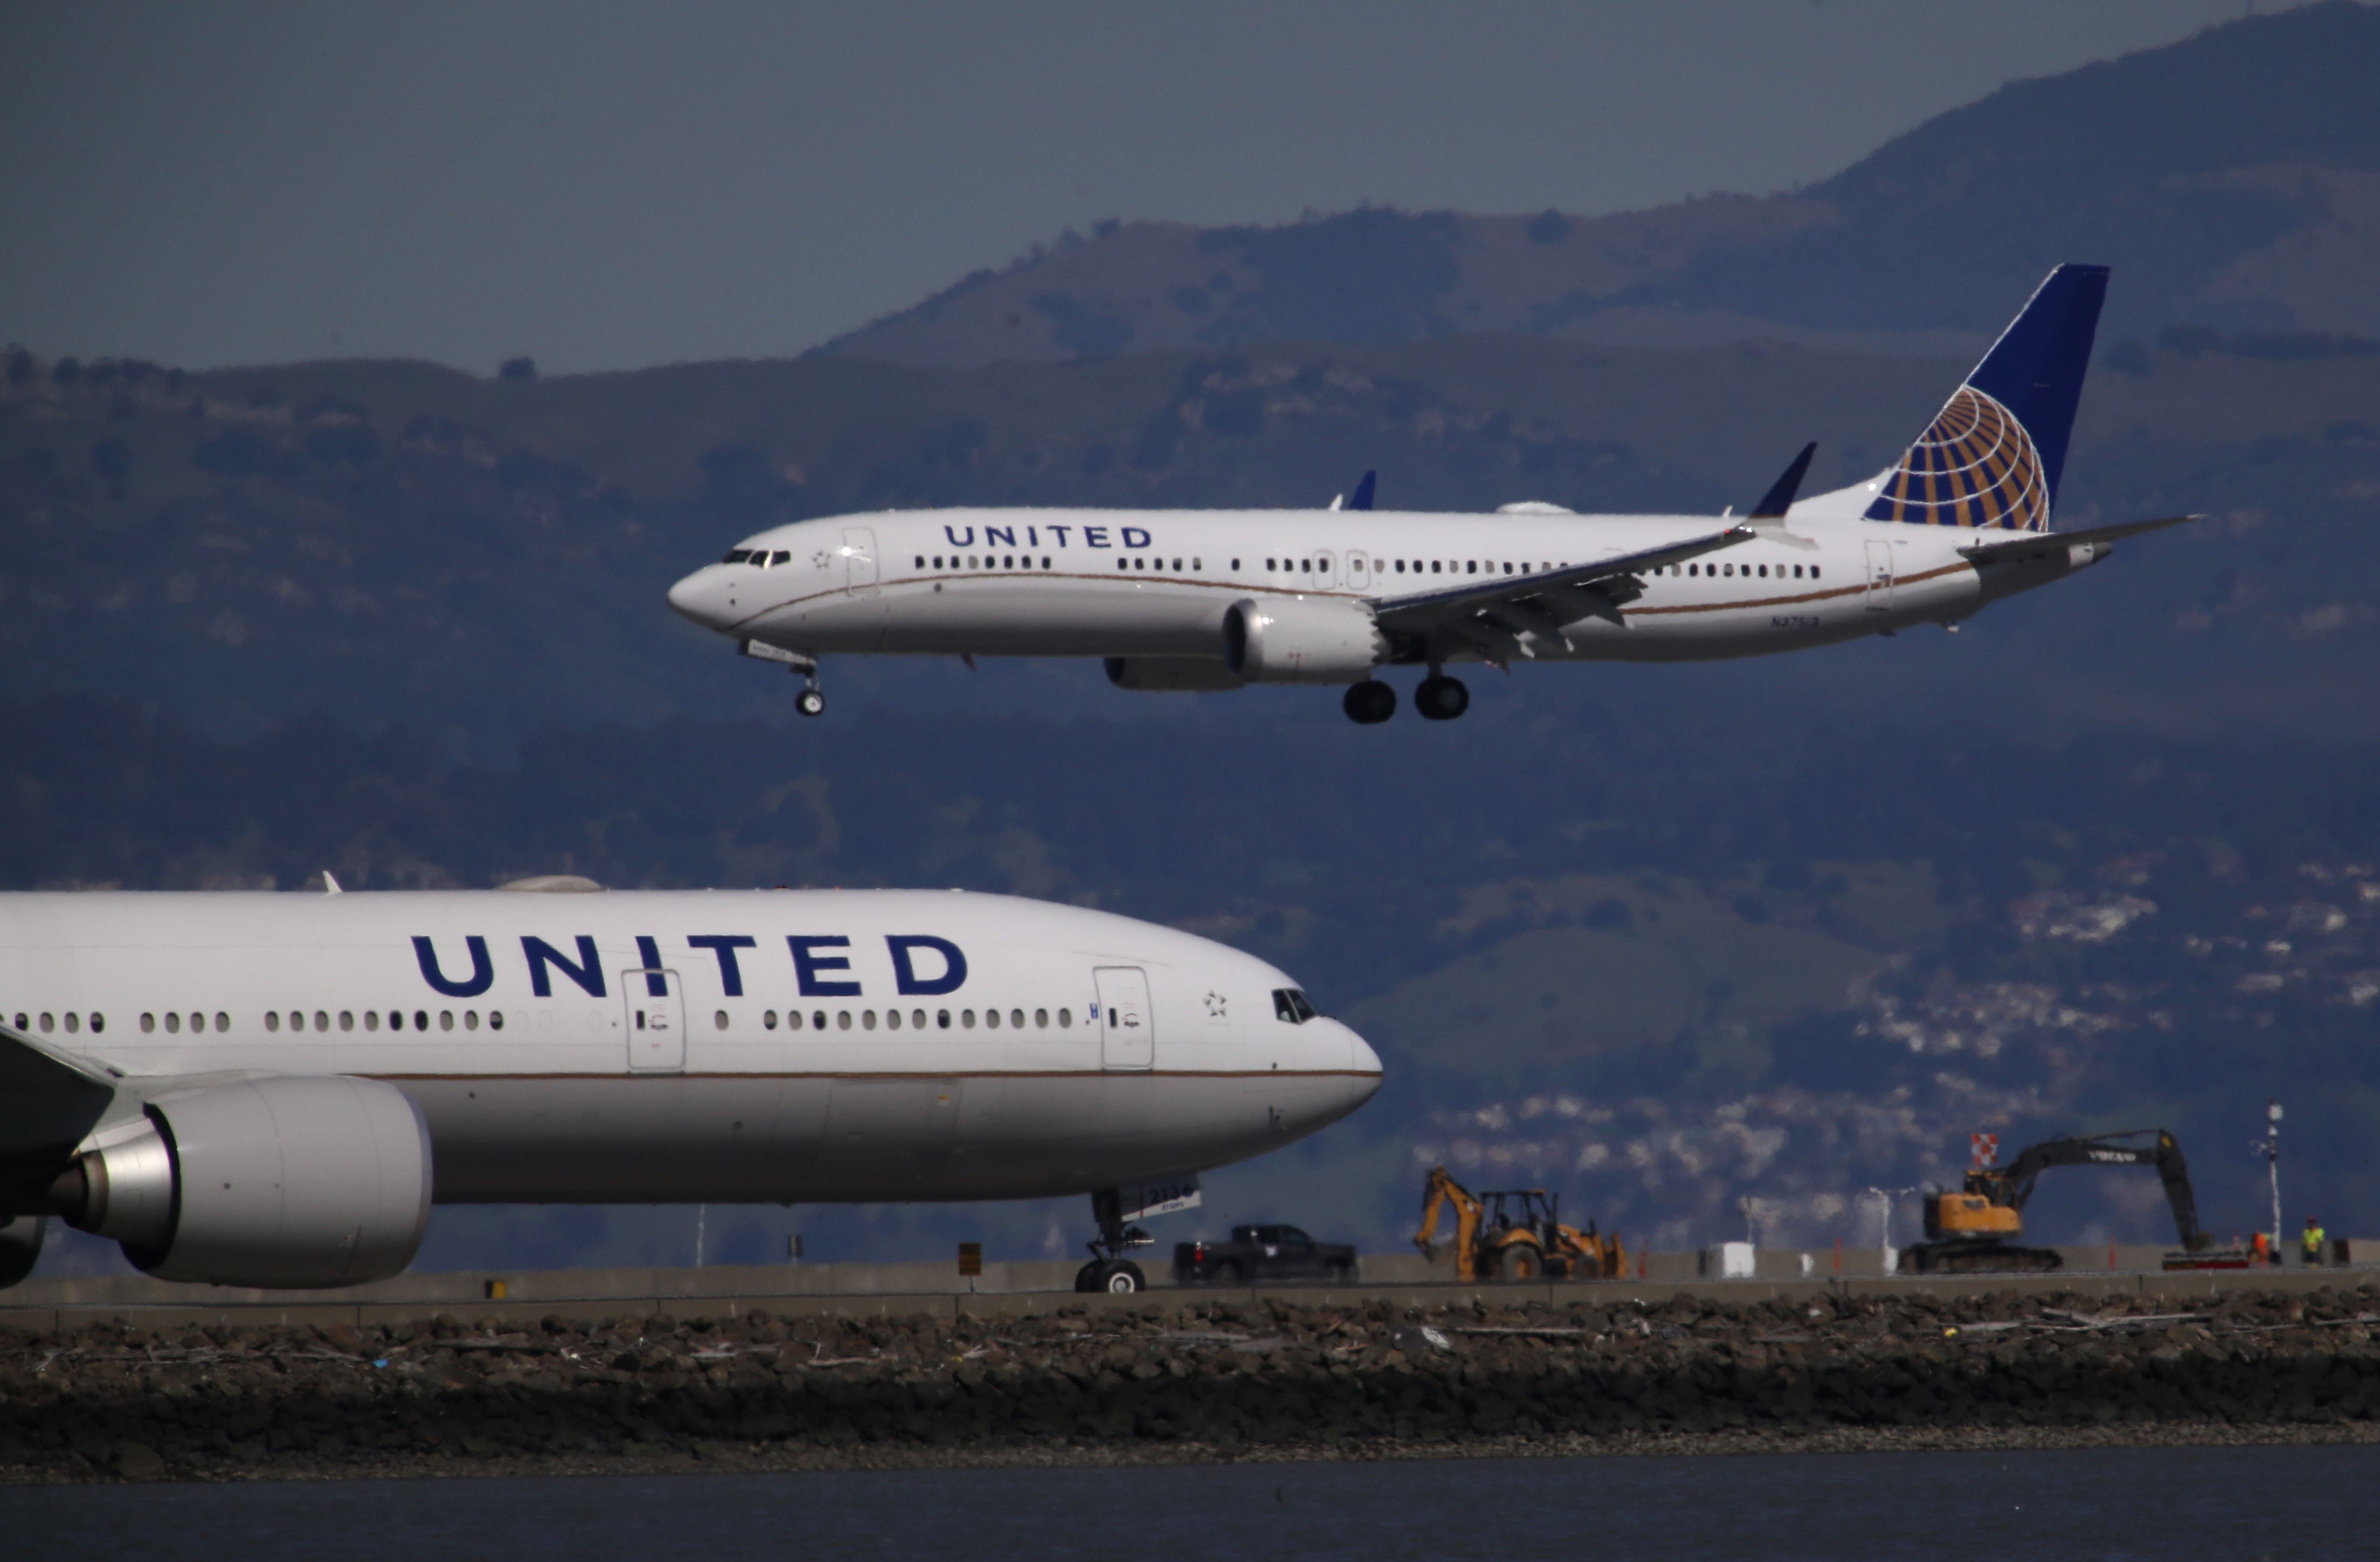 United Airlines puts tickets on sale for new direct flights between Malaga and New York